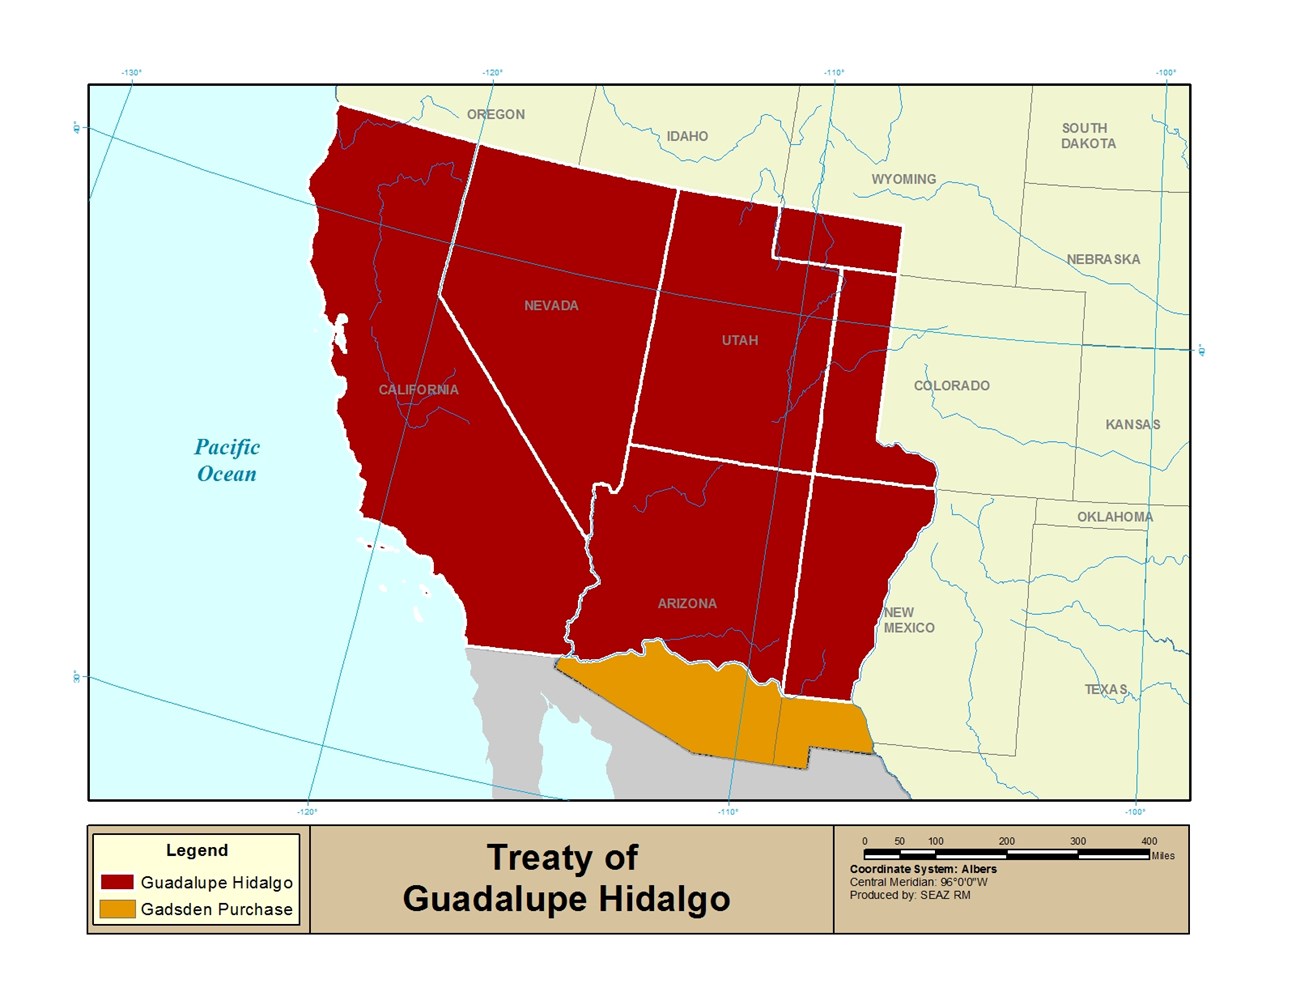 Map of land Mexico ceded to the United States of America during the Treaty of Guadalupe-Hidalgo, as well as the Gadsden Purchase.